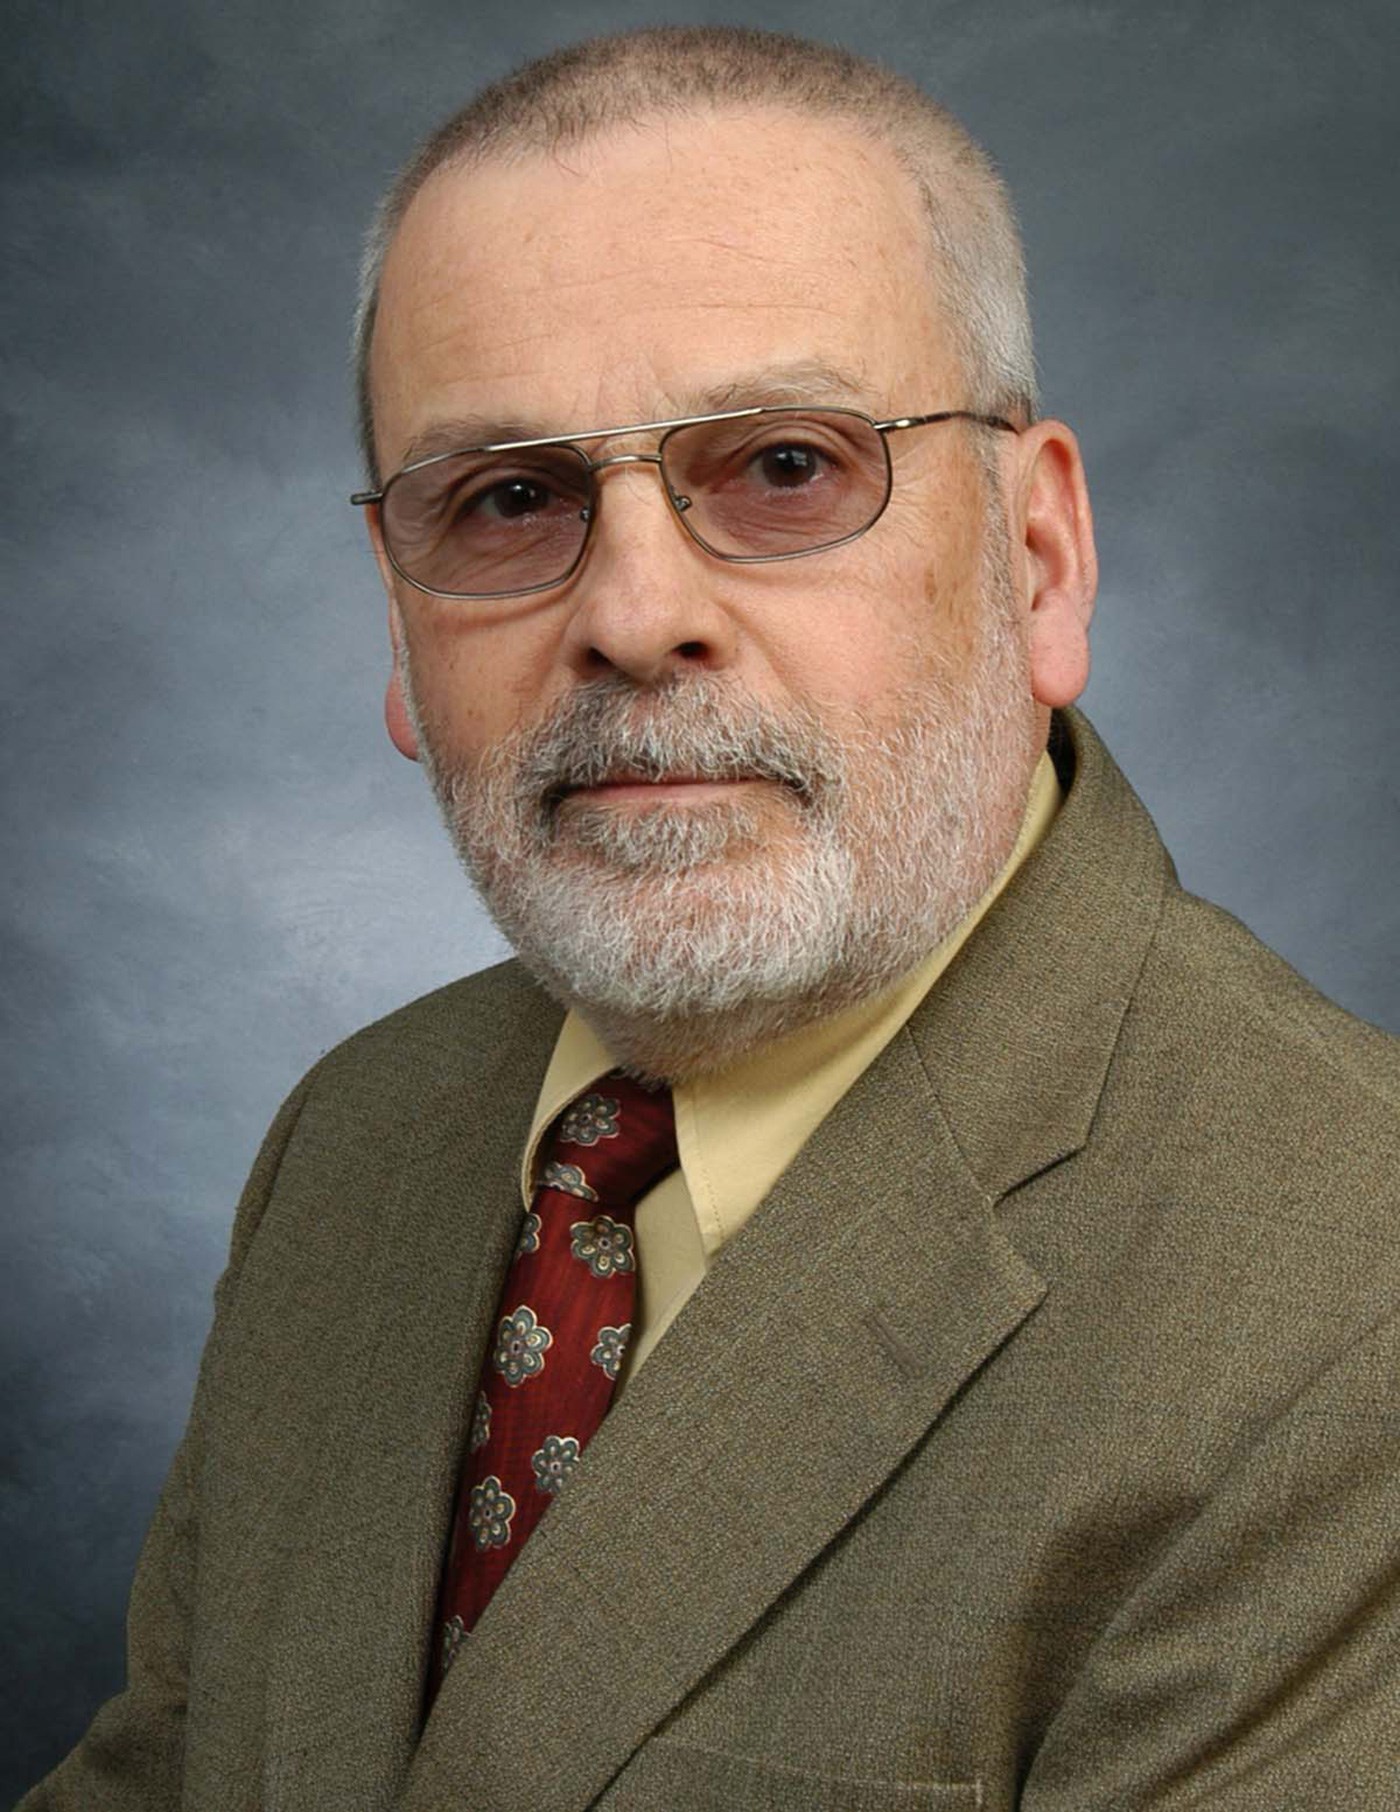 George Cheney is a Professor Emeritus in the Francis College of Engineering's Electrical & Computer Engineering Dept. at UMass Lowell.